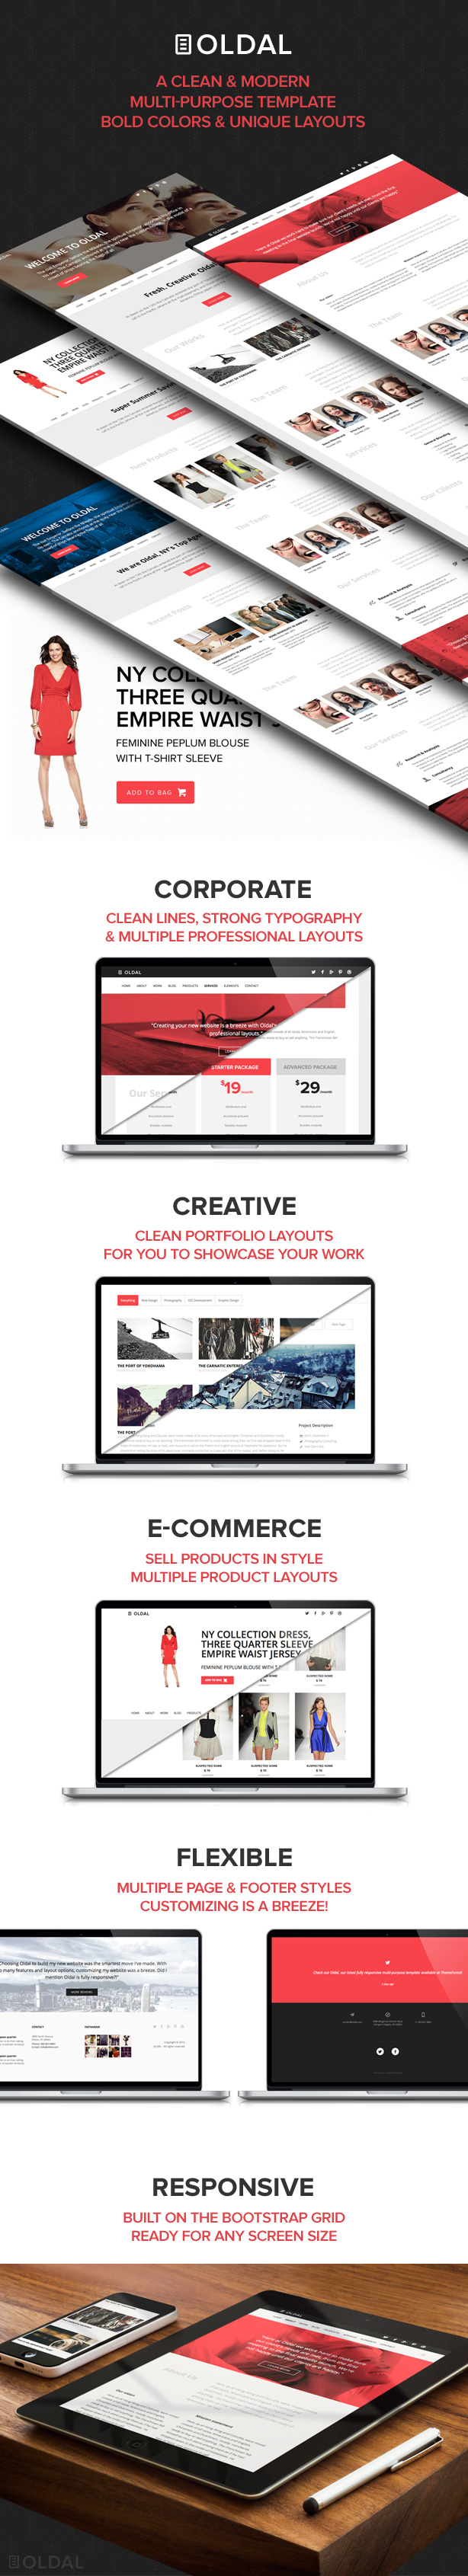 Oldal - Responsive HTML5 Business Template - 7